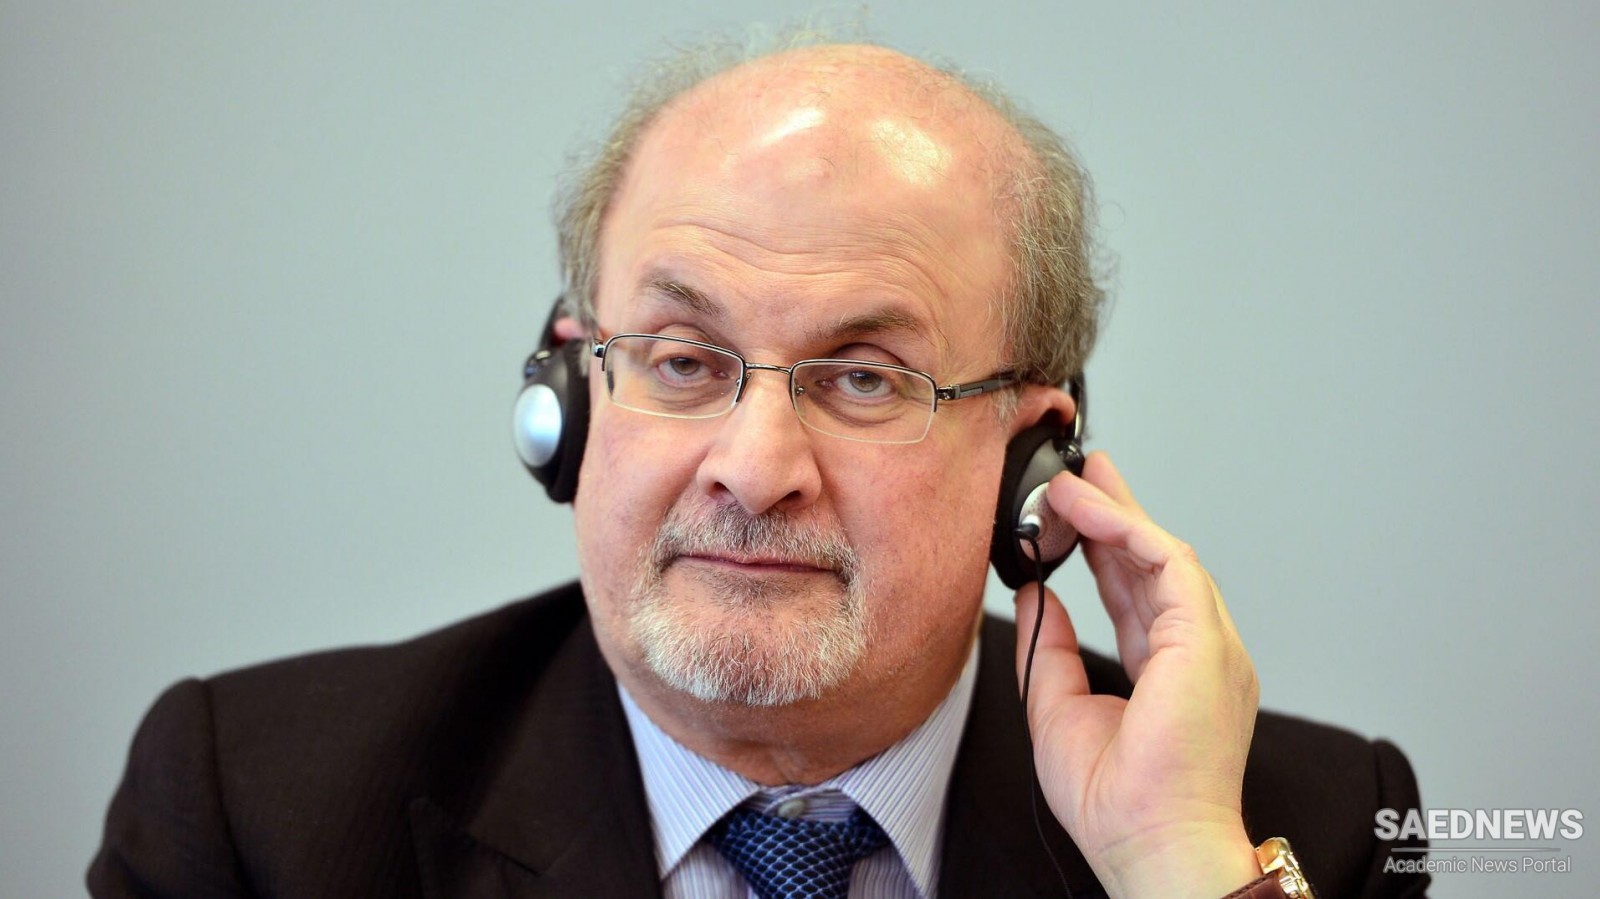 Salman Rushdie, author of The Satanic Verses, attacked on stage in New York